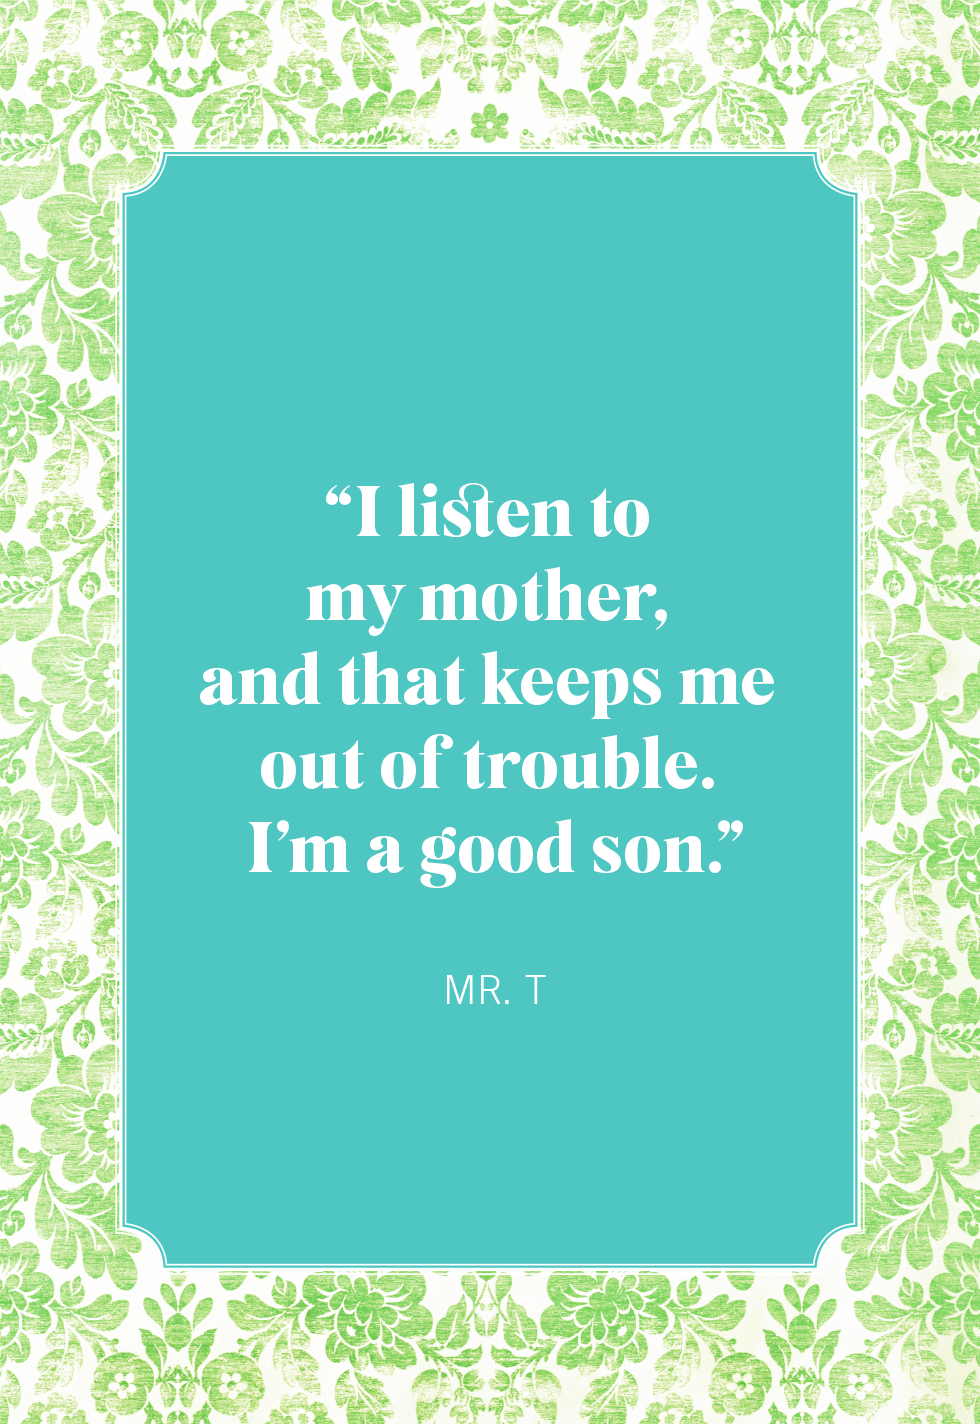 Top 999 Mother Son Relationship Quotes With Images Amazing Collection Mother Son Relationship